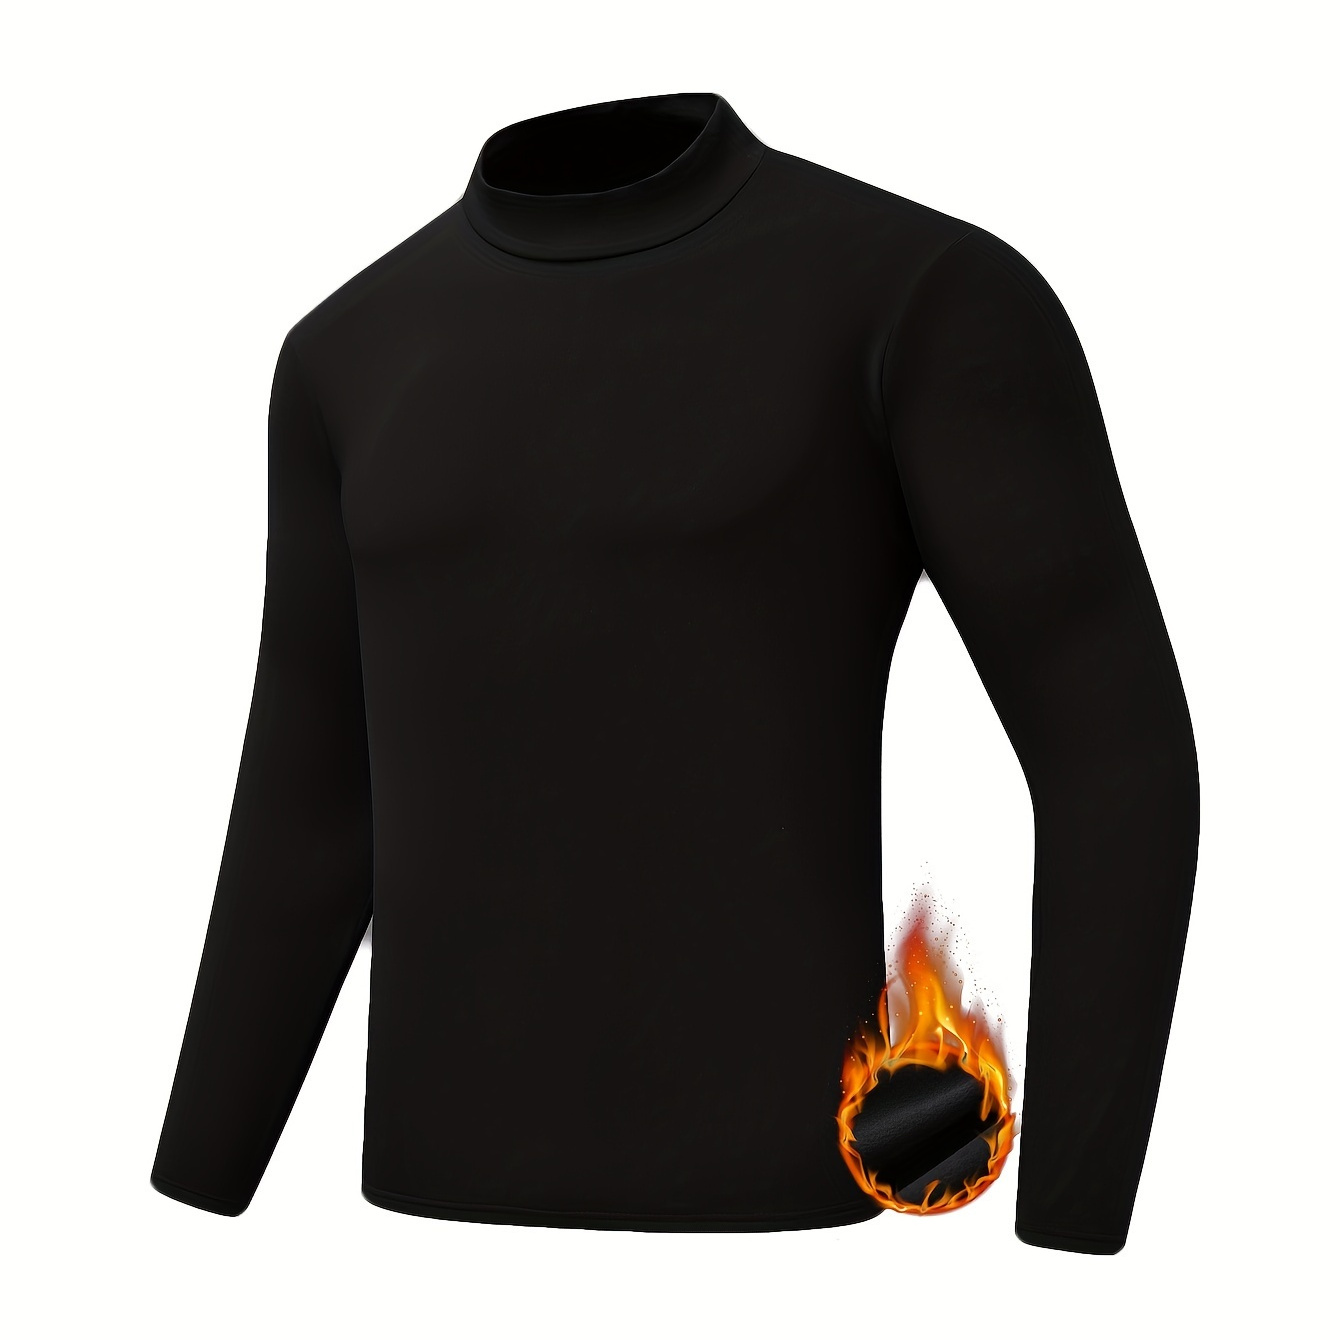 Men's Thermal Underwear Top, Turtleneck Long Sleeve Warm Bottoming Shirt, Casual Slim Fit Base Layers Tops